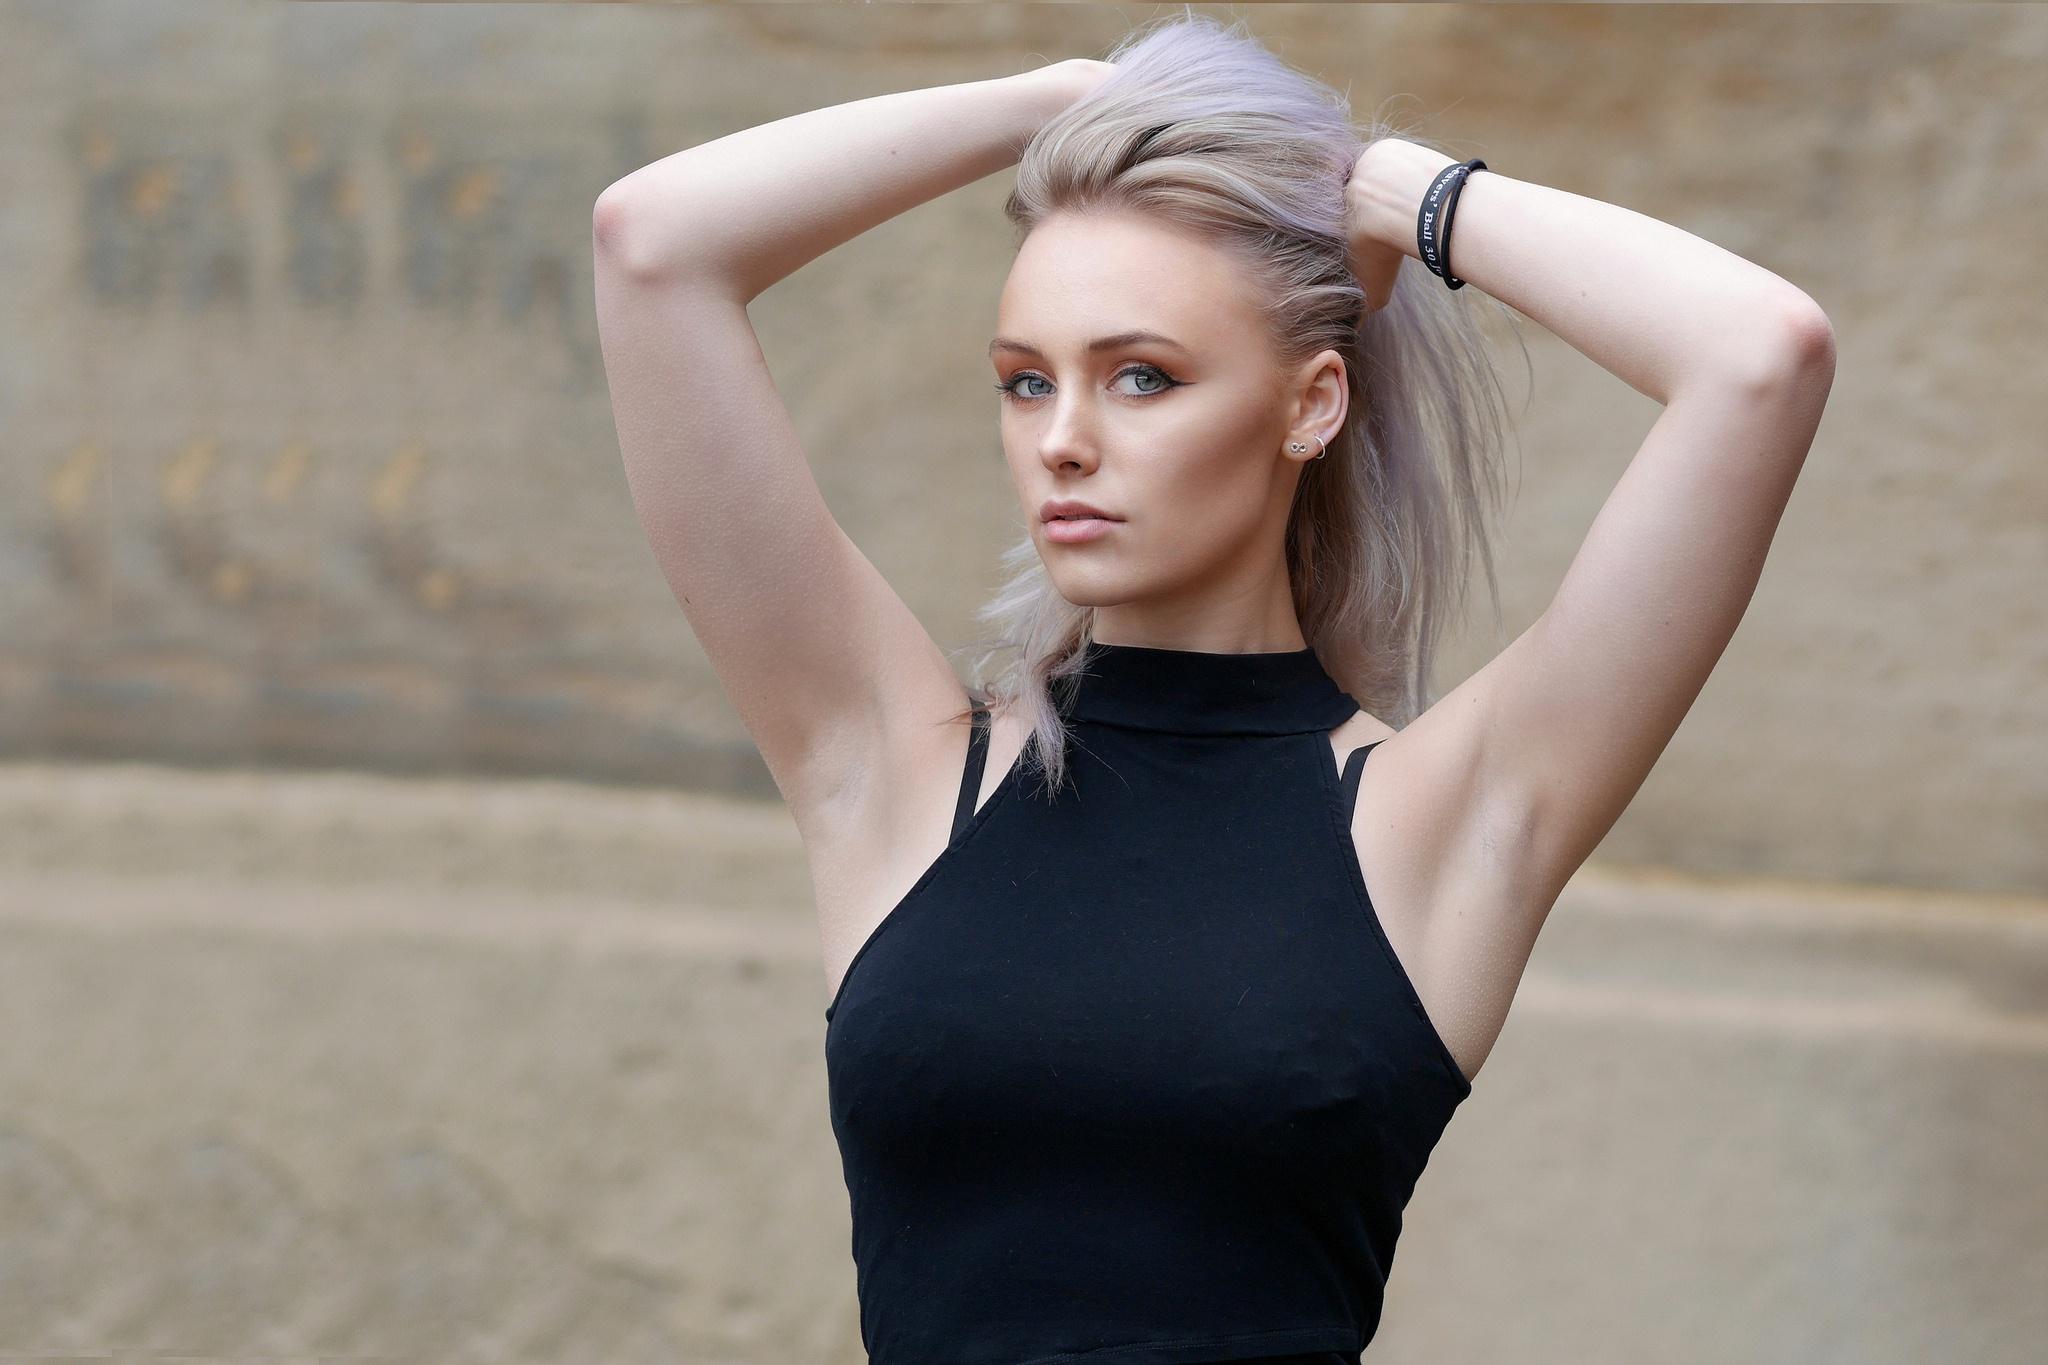 #armpits, #arms up, #blonde, #model, #women